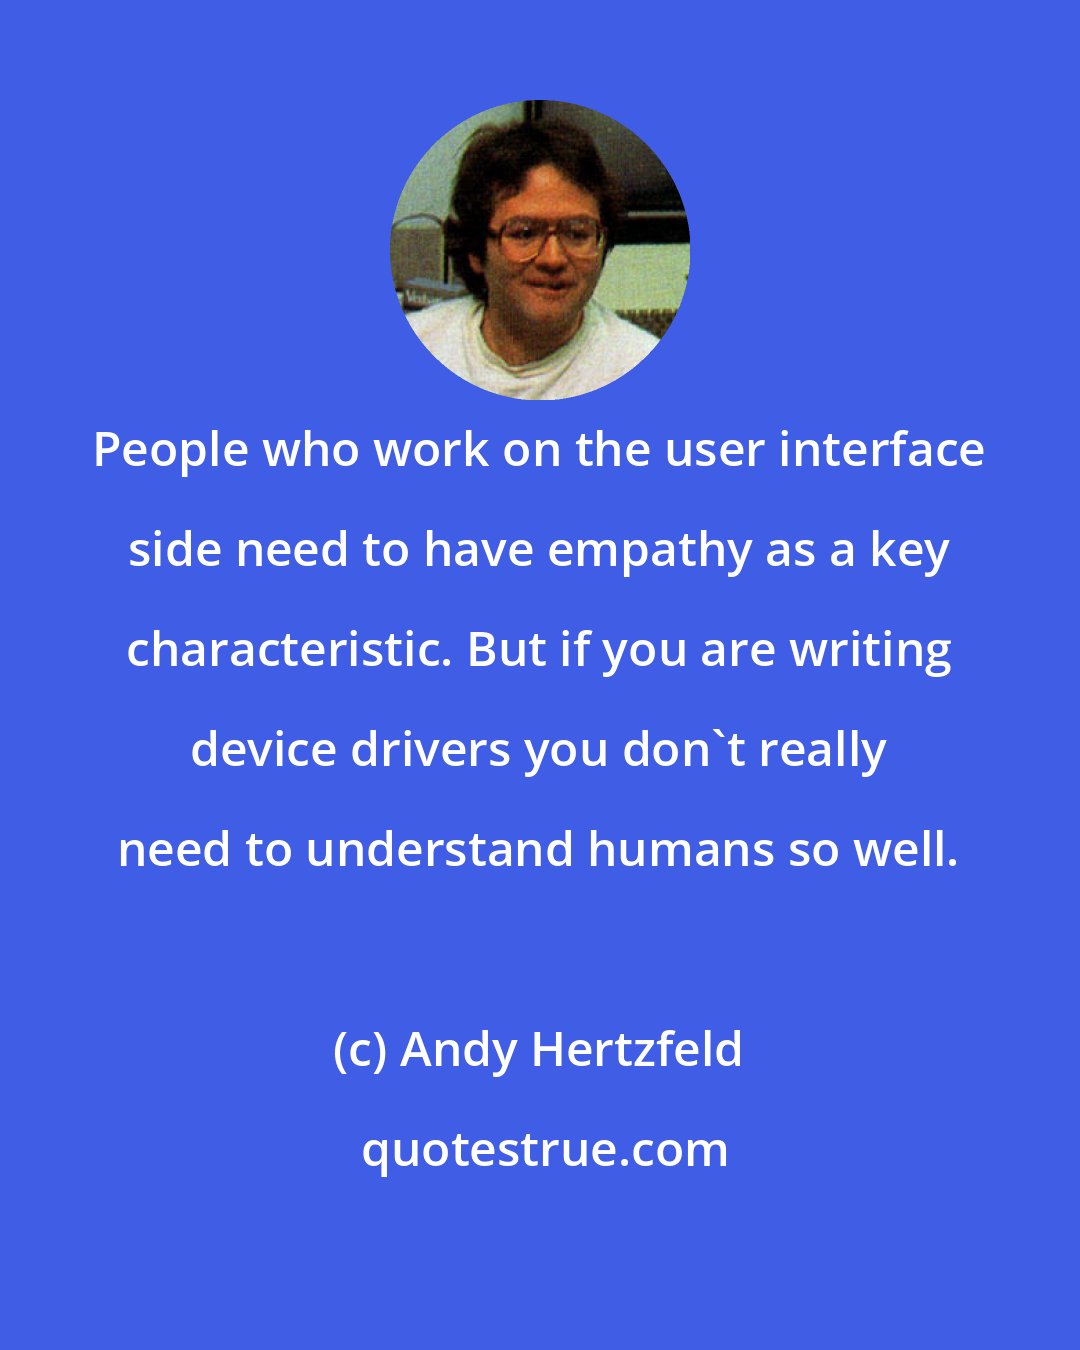 Andy Hertzfeld: People who work on the user interface side need to have empathy as a key characteristic. But if you are writing device drivers you don't really need to understand humans so well.